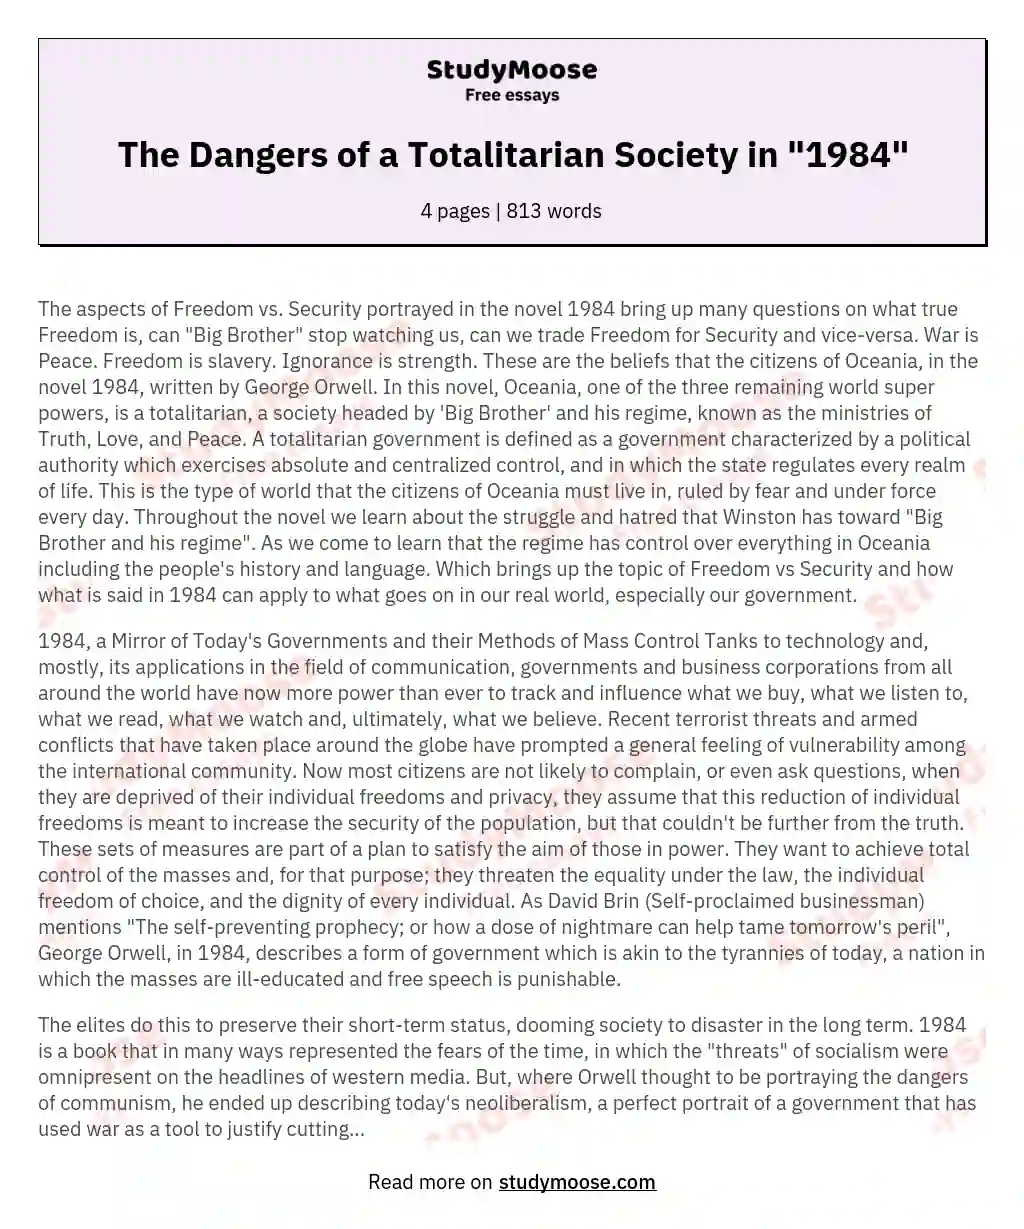 1984 totalitarianism thesis statement